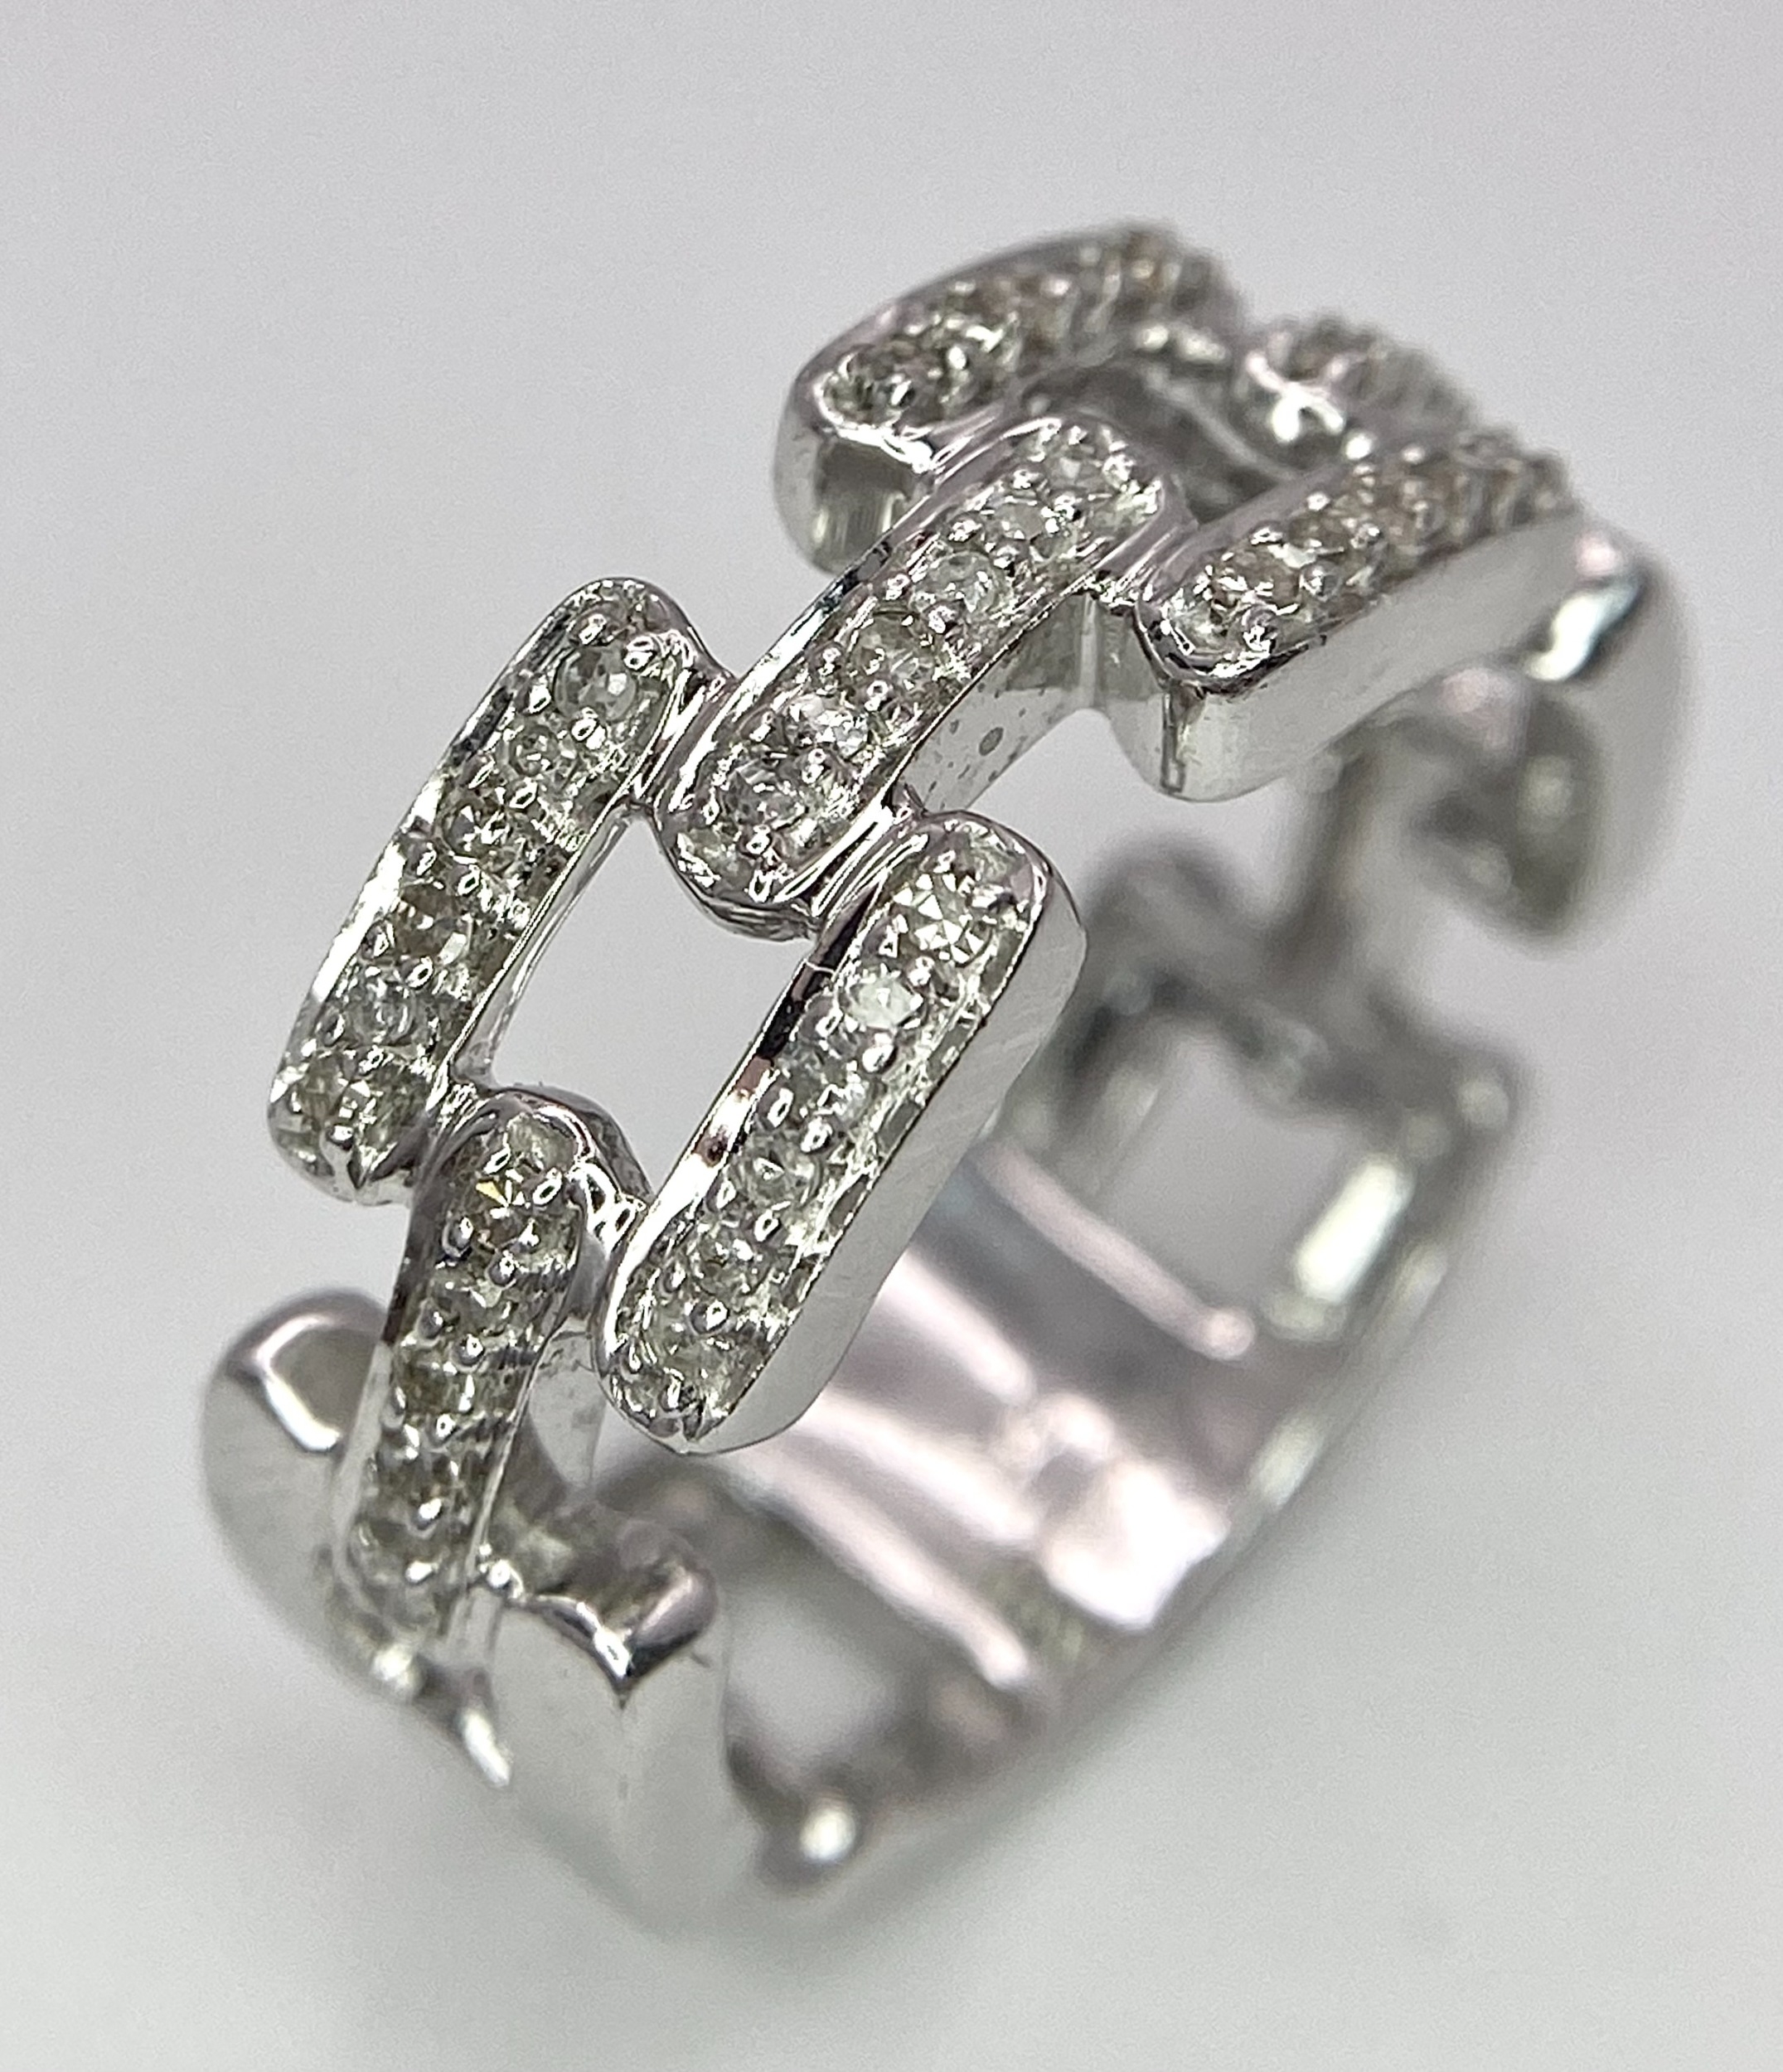 A 9K WHITE GOLD DIAMOND SET LINK RING. 0.25ctw, Size N, 4.7g total weight. Ref: SC 8003 - Image 4 of 6